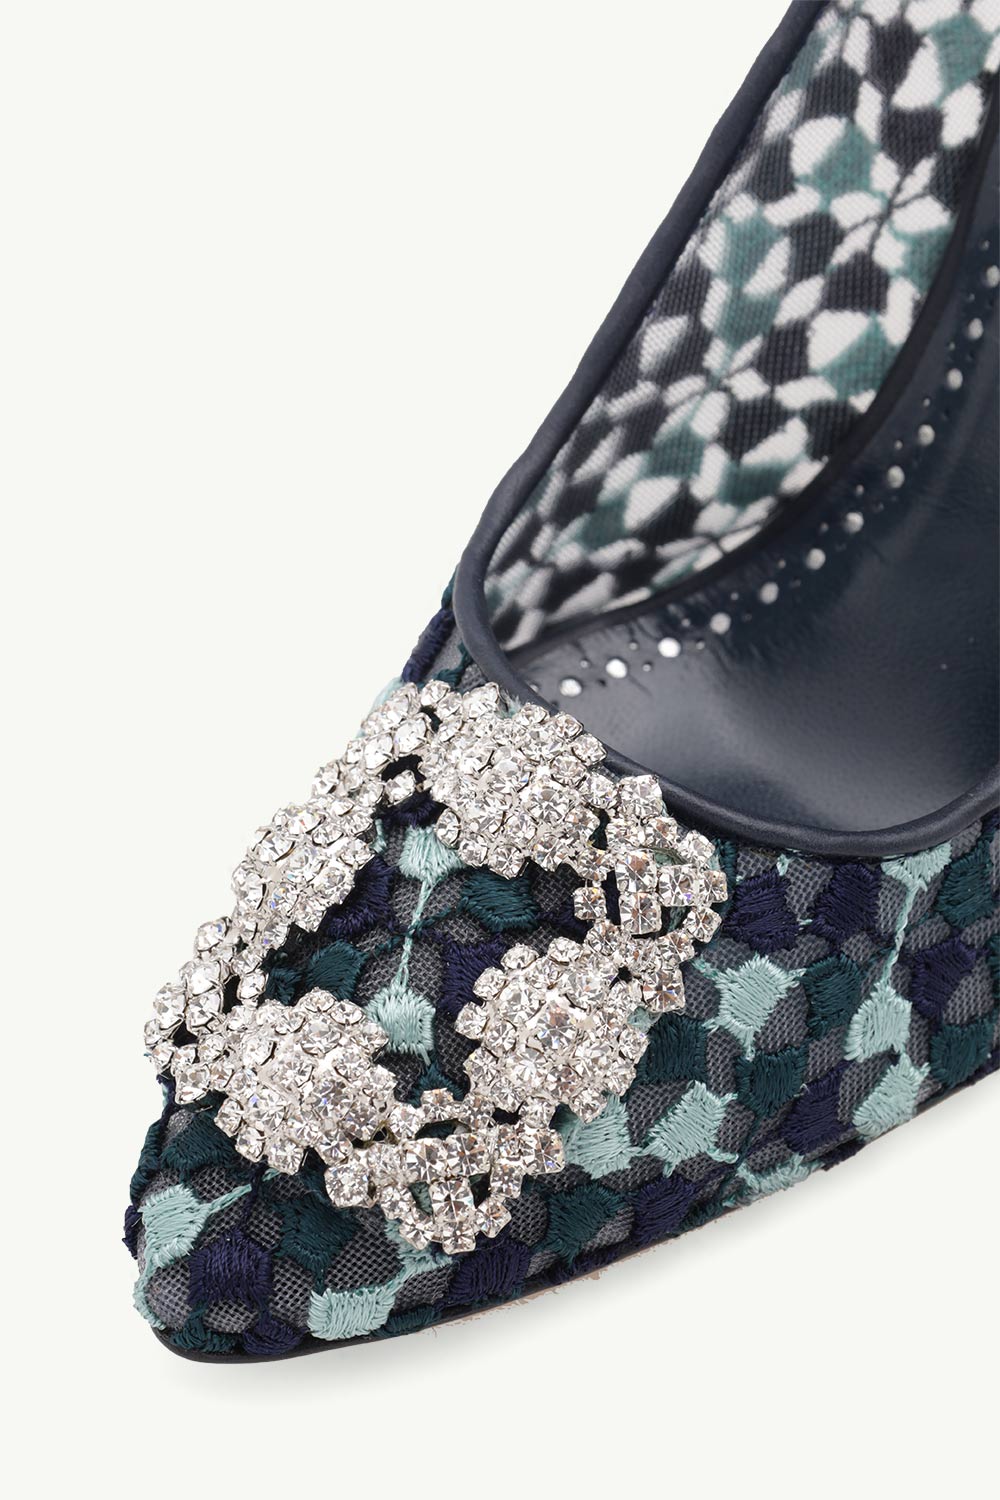 MANOLO BLAHNIK Hangisi Floral Embroidery 10.5cm Pumps in Navy/Turquoise Lace x Nappa with White Crystal 4